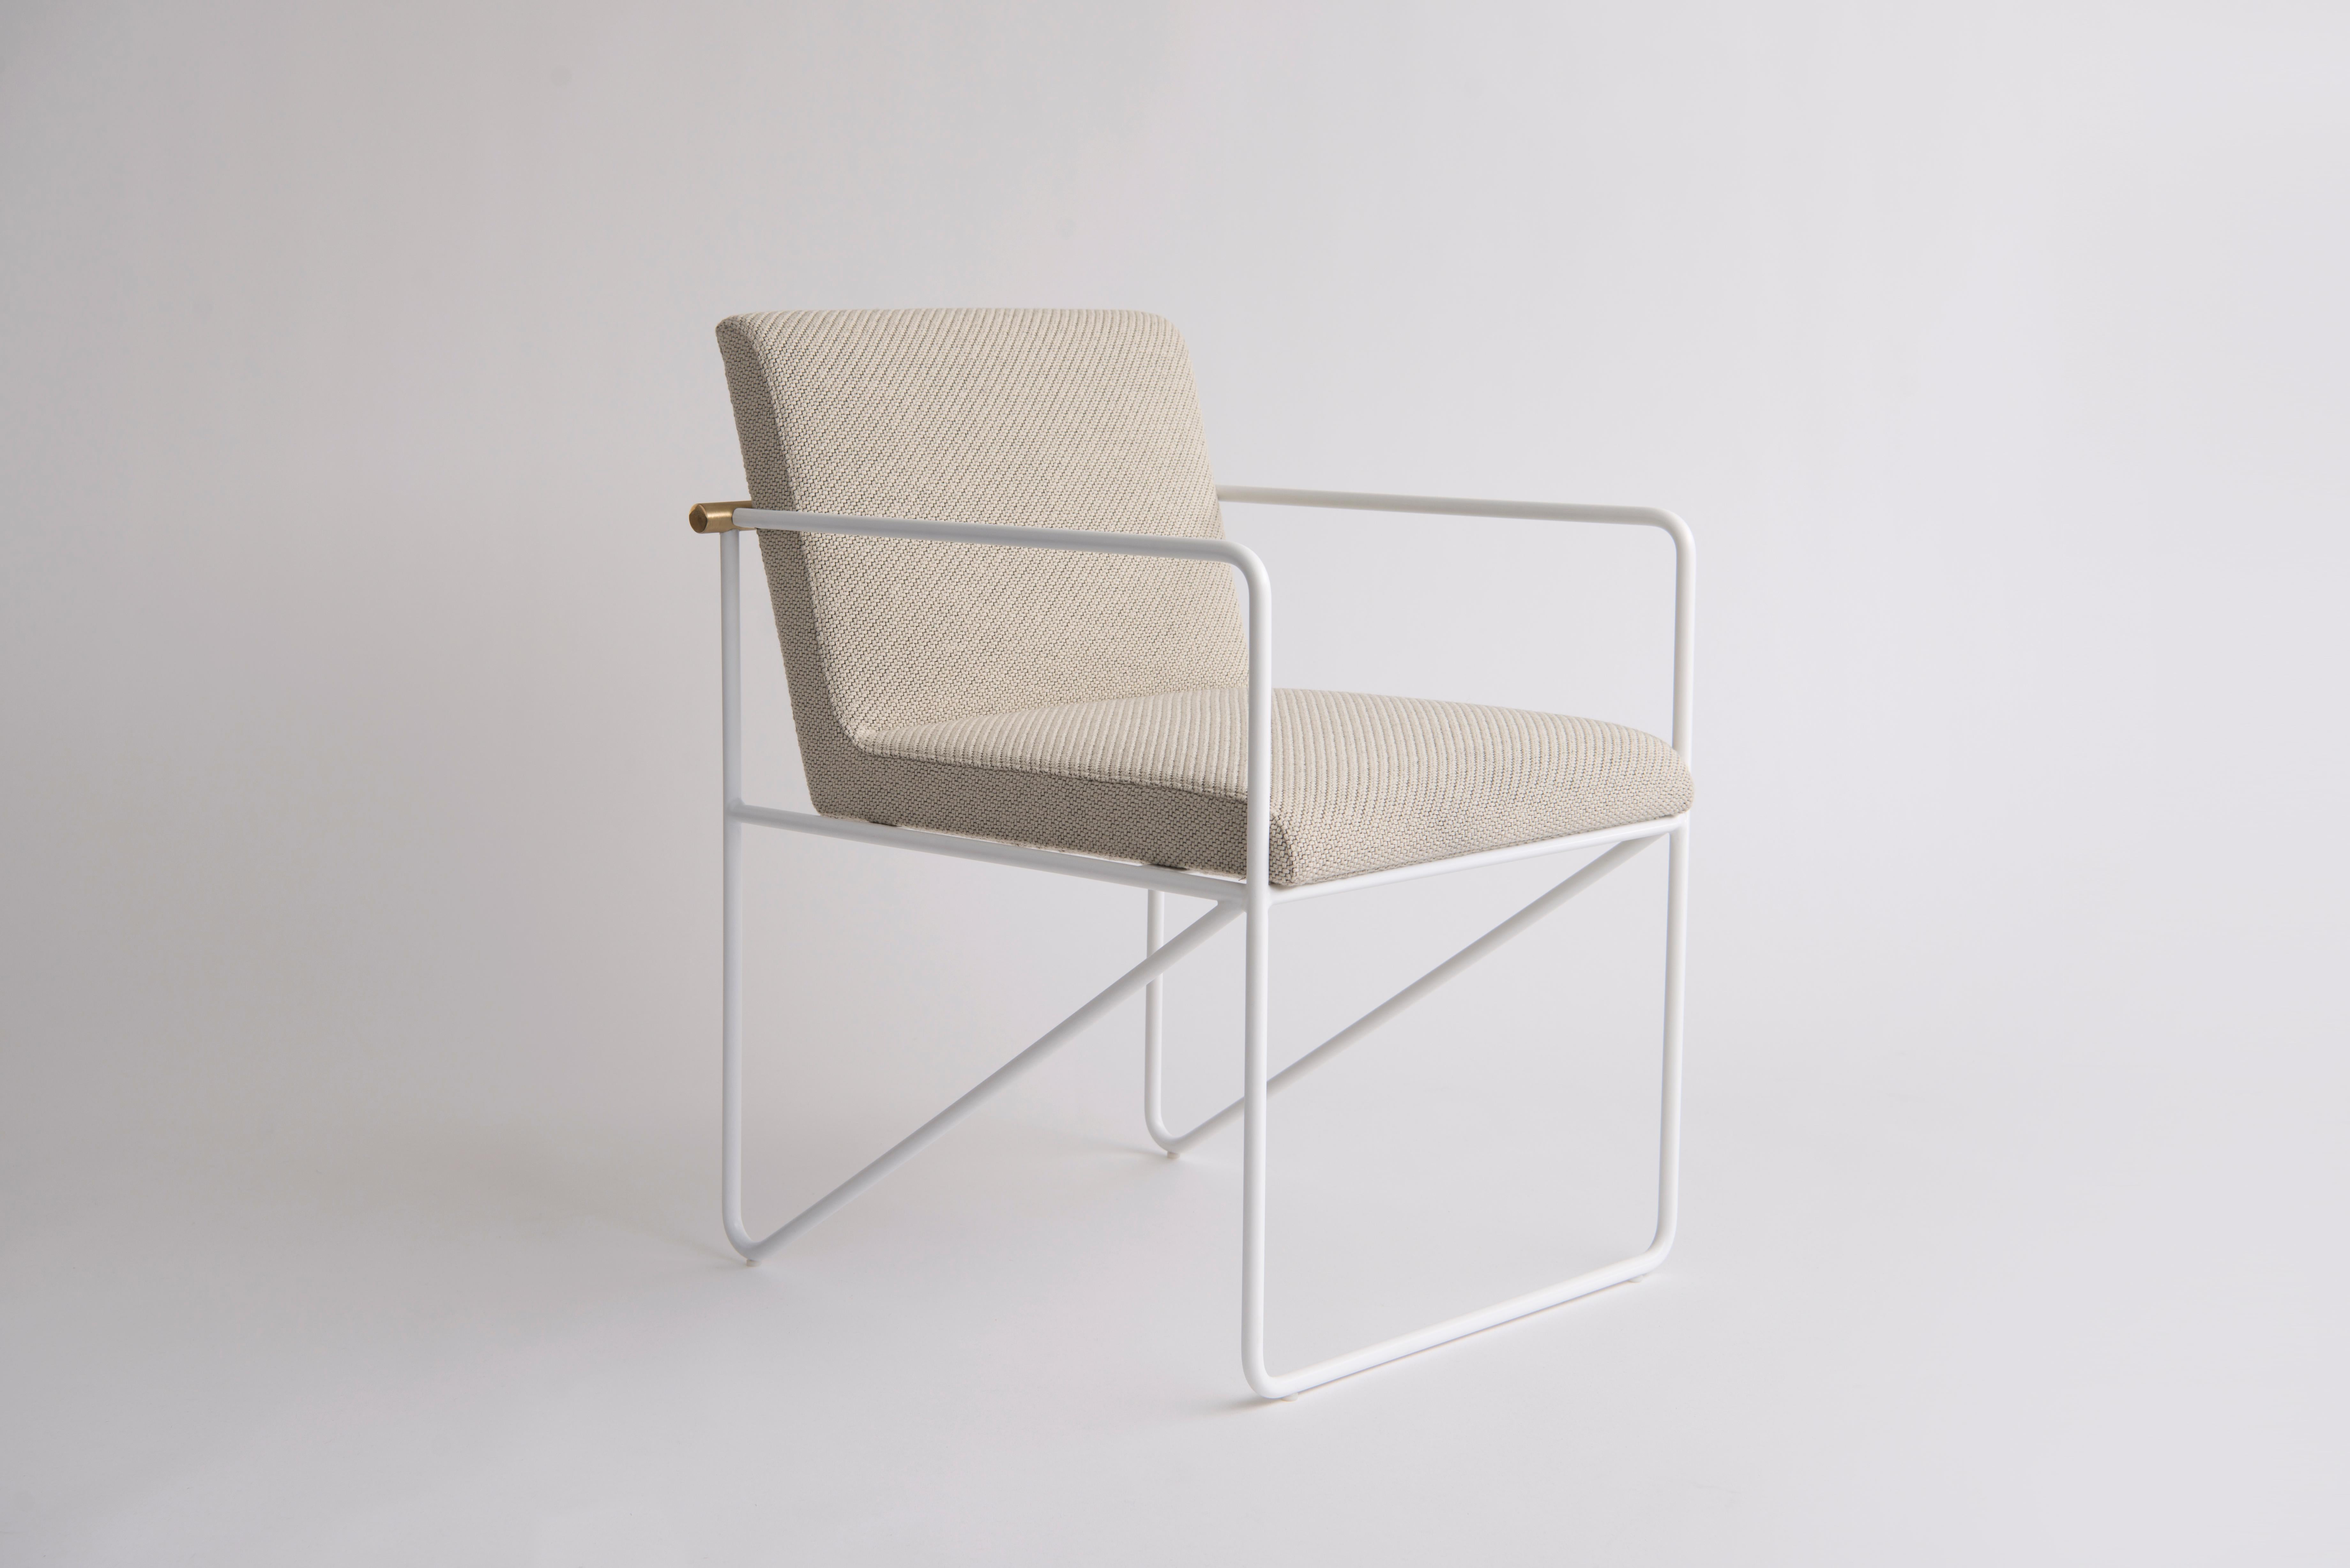 Important to note that this listing is for the Kickstand Side Chair (With Arms) in a Flat White Powder Coat Finish. Pricing is COM and this listing does not include the price of fabric. A configuration without arms is also available; see separate